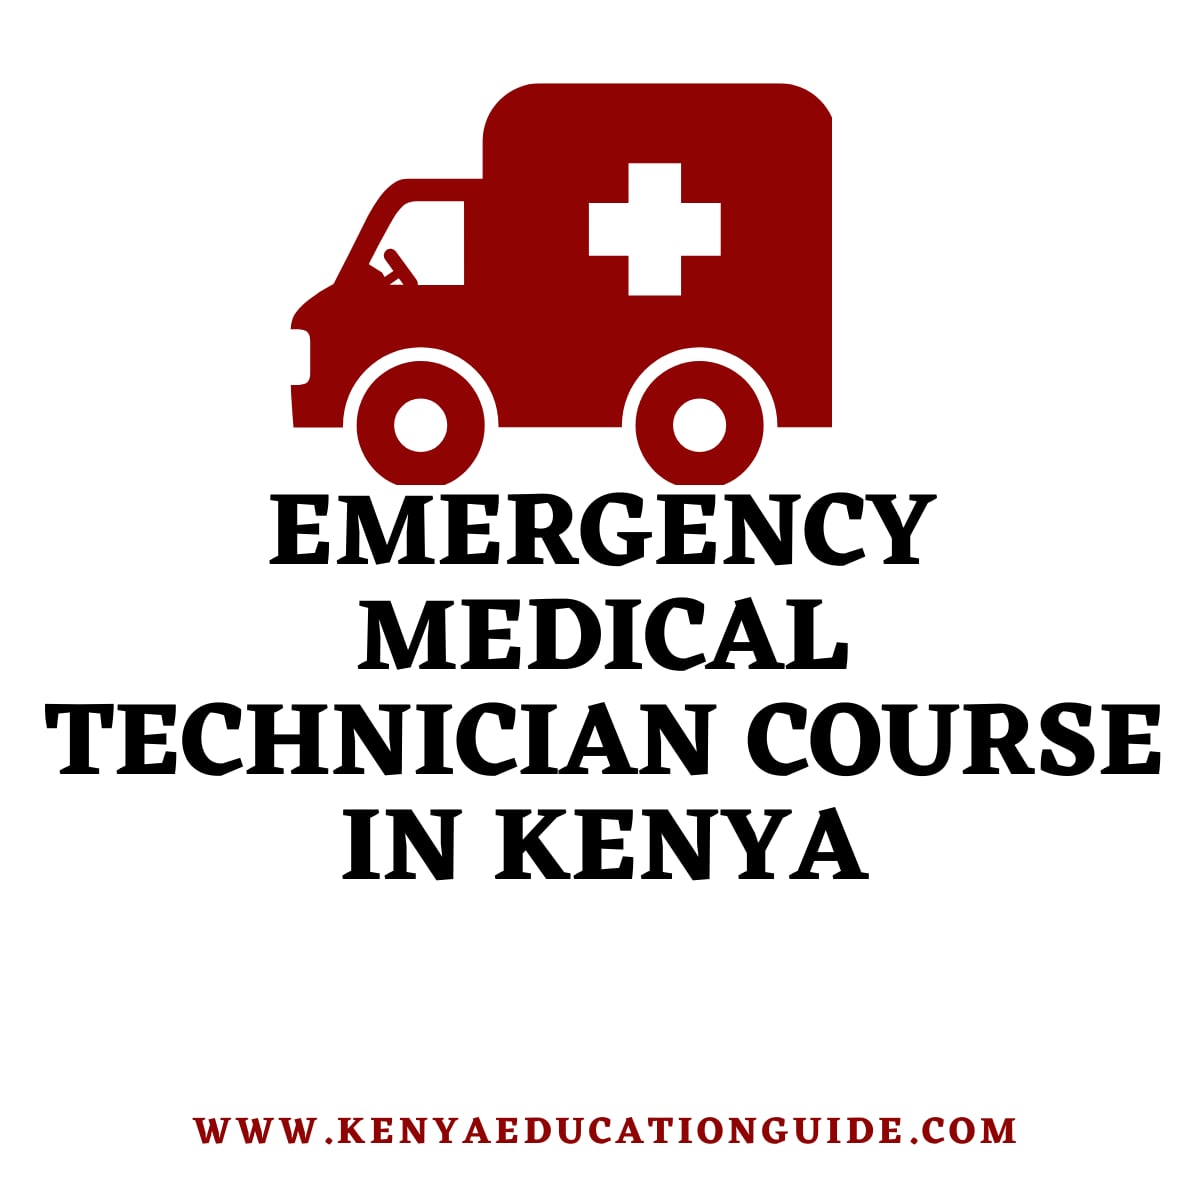 Emergency Medical Technician Course in Kenya and EMT Course Fees